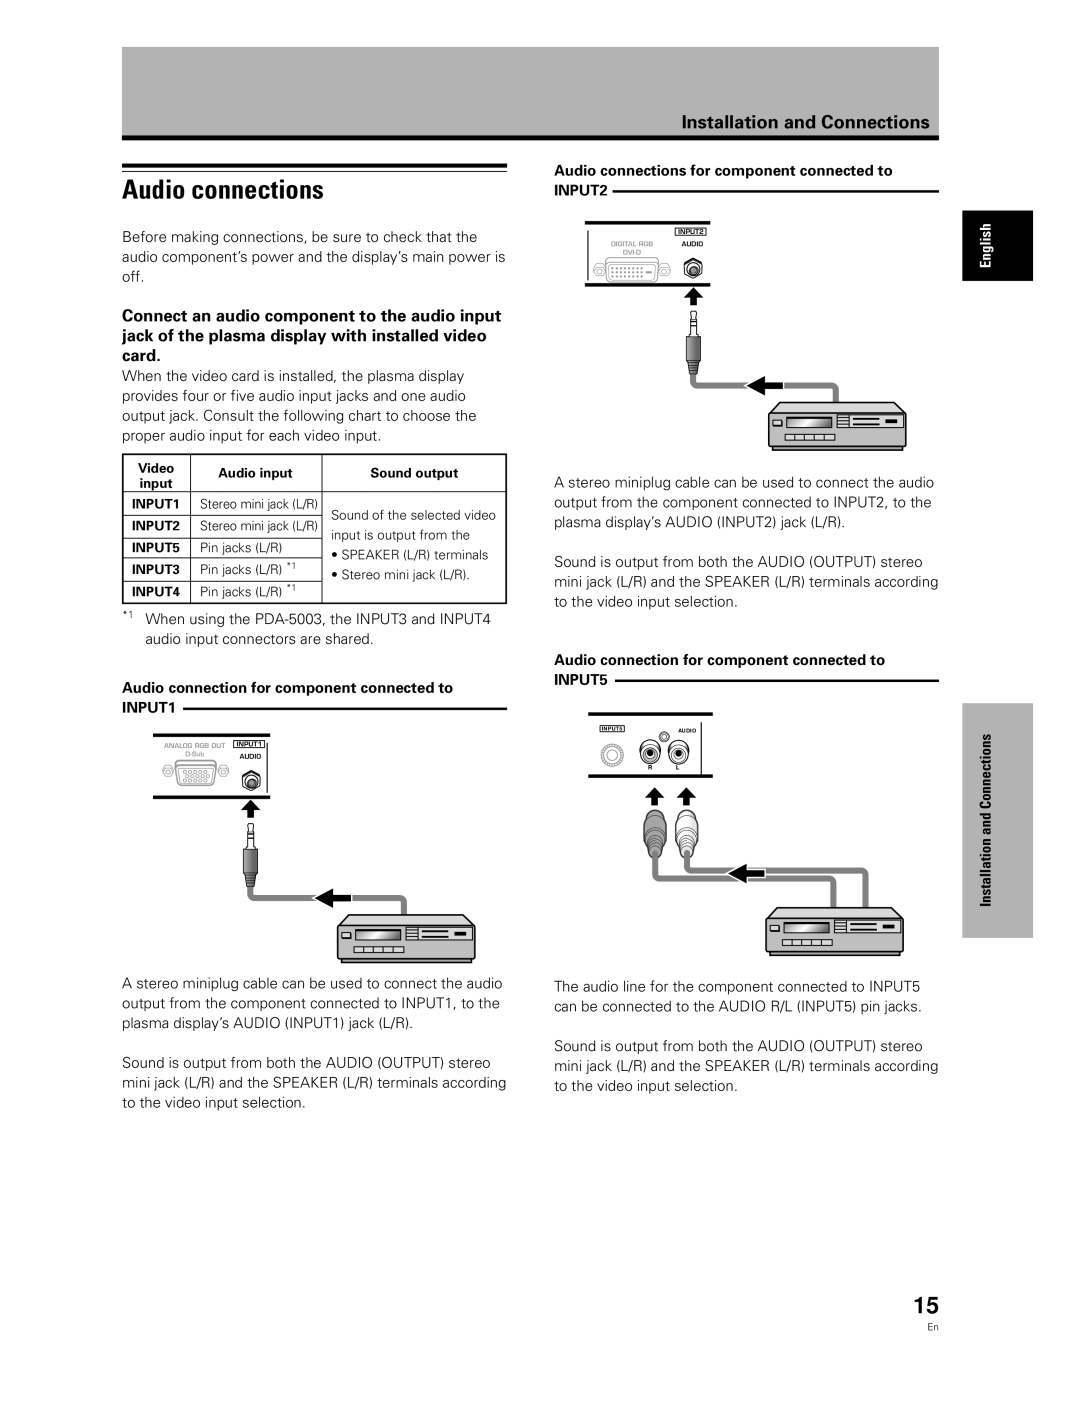 Pioneer PDA-5003 manual Audio connections, Audio connection for component connected to INPUT1, Installation and Connections 